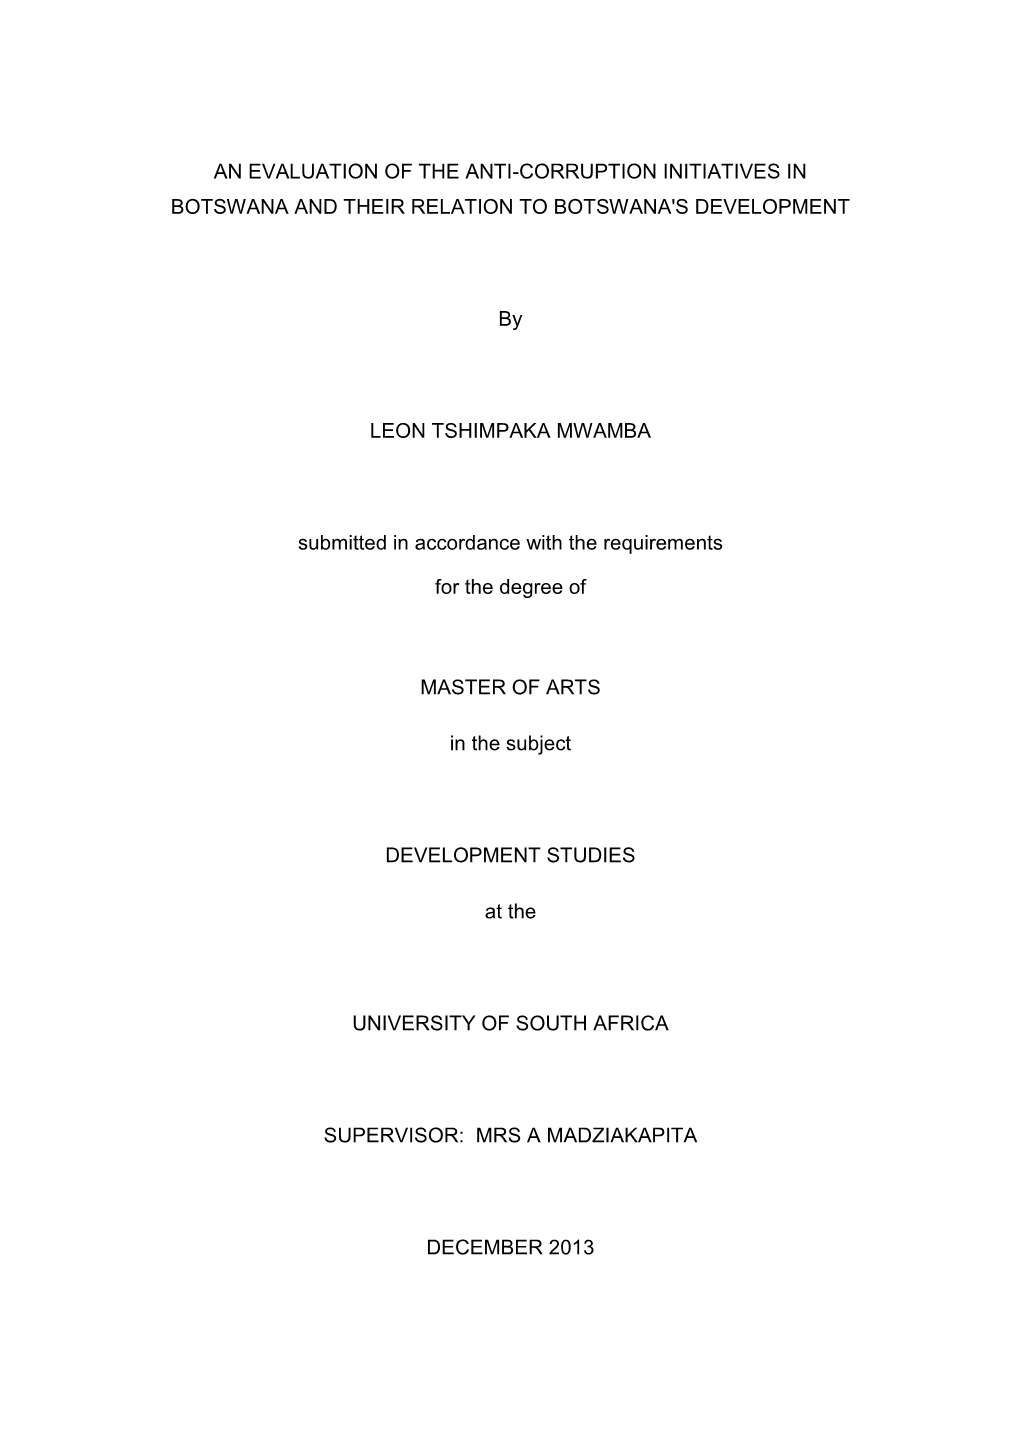 An Evaluation of the Anti-Corruption Initiatives in Botswana and Their Relation to Botswana's Development